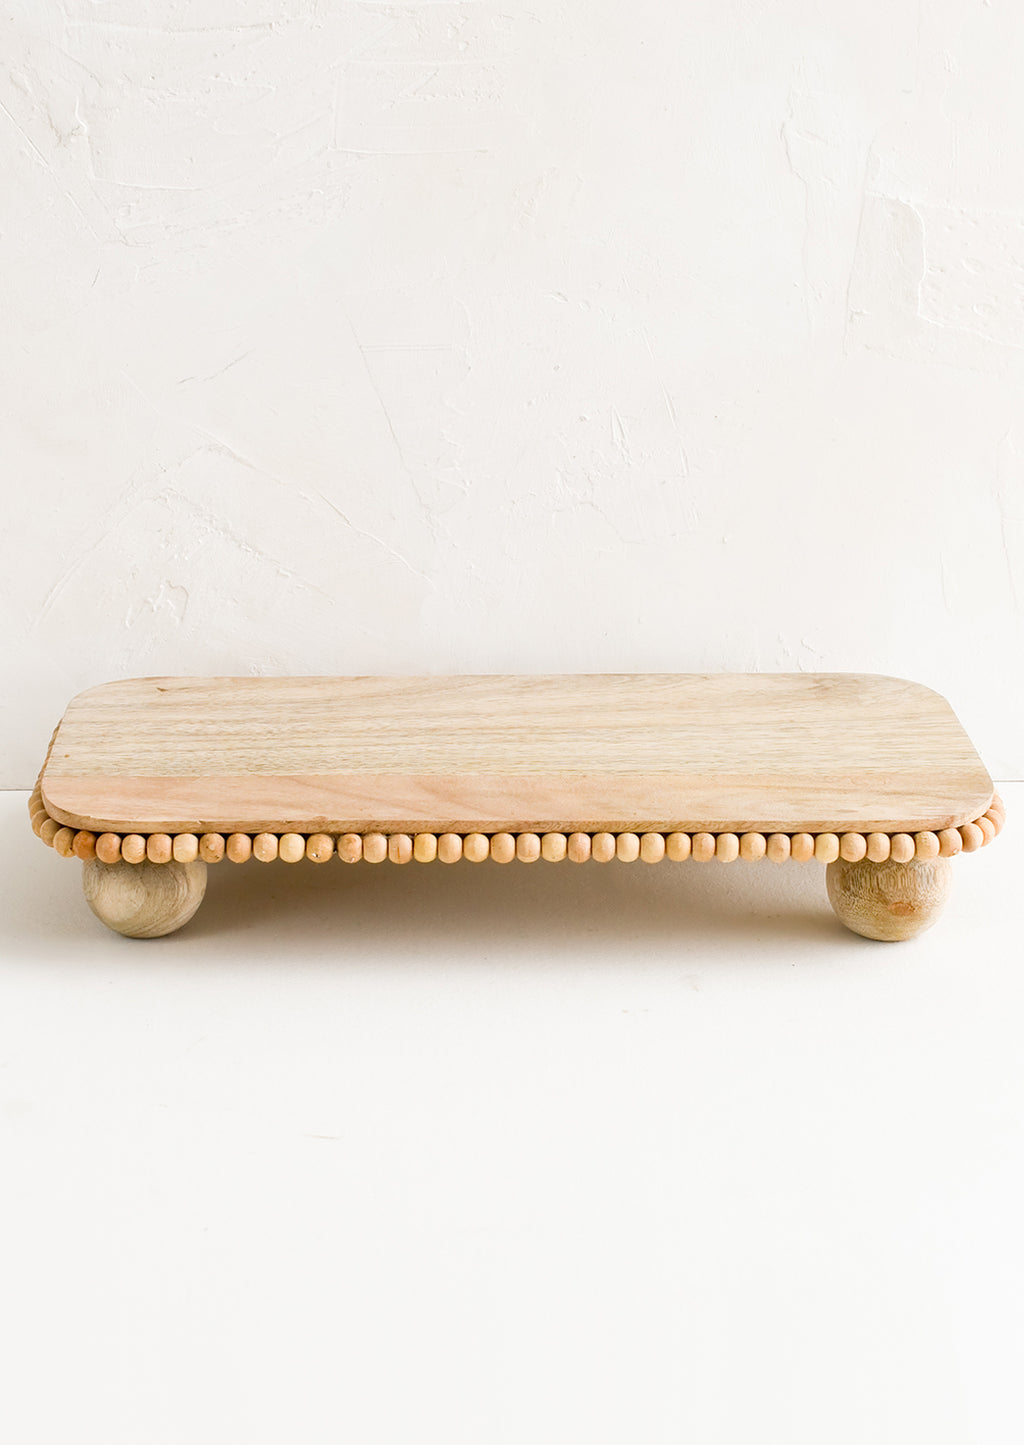 1: A rectangular wooden riser with round feet and beaded detail.